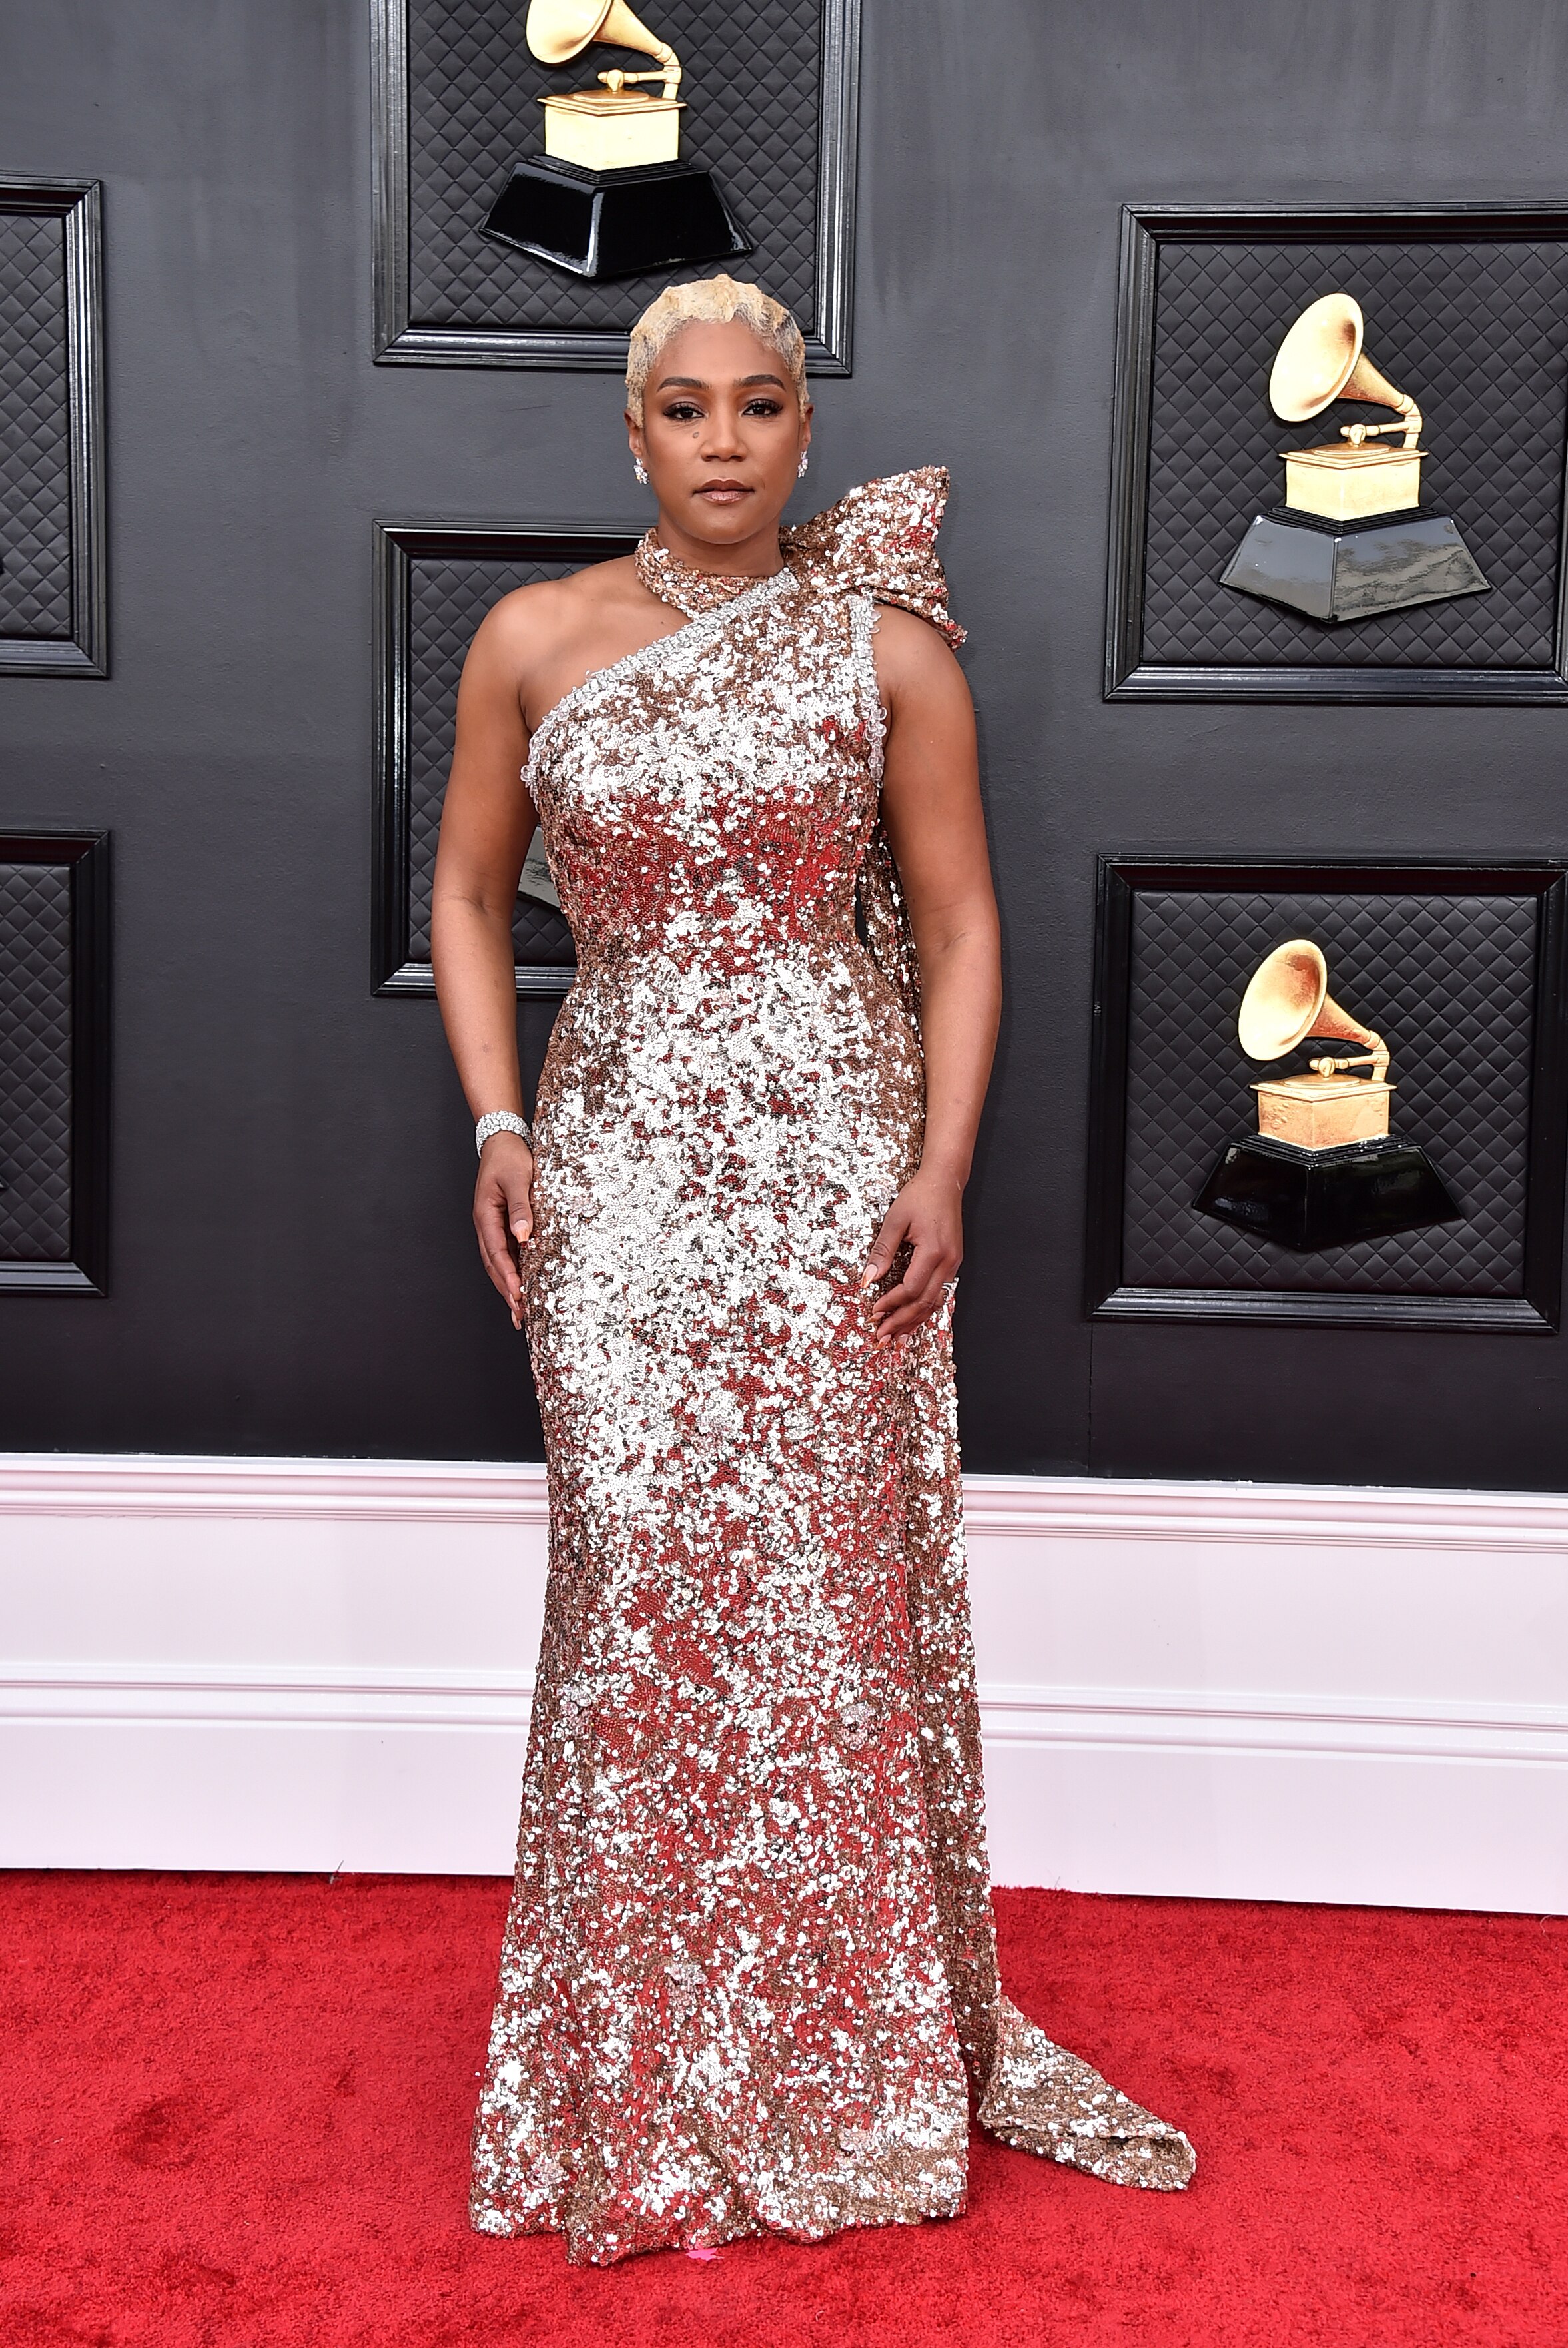 tiffany haddish poses wearing a glittering gold one-shoulder long gown on the grammys red carpet